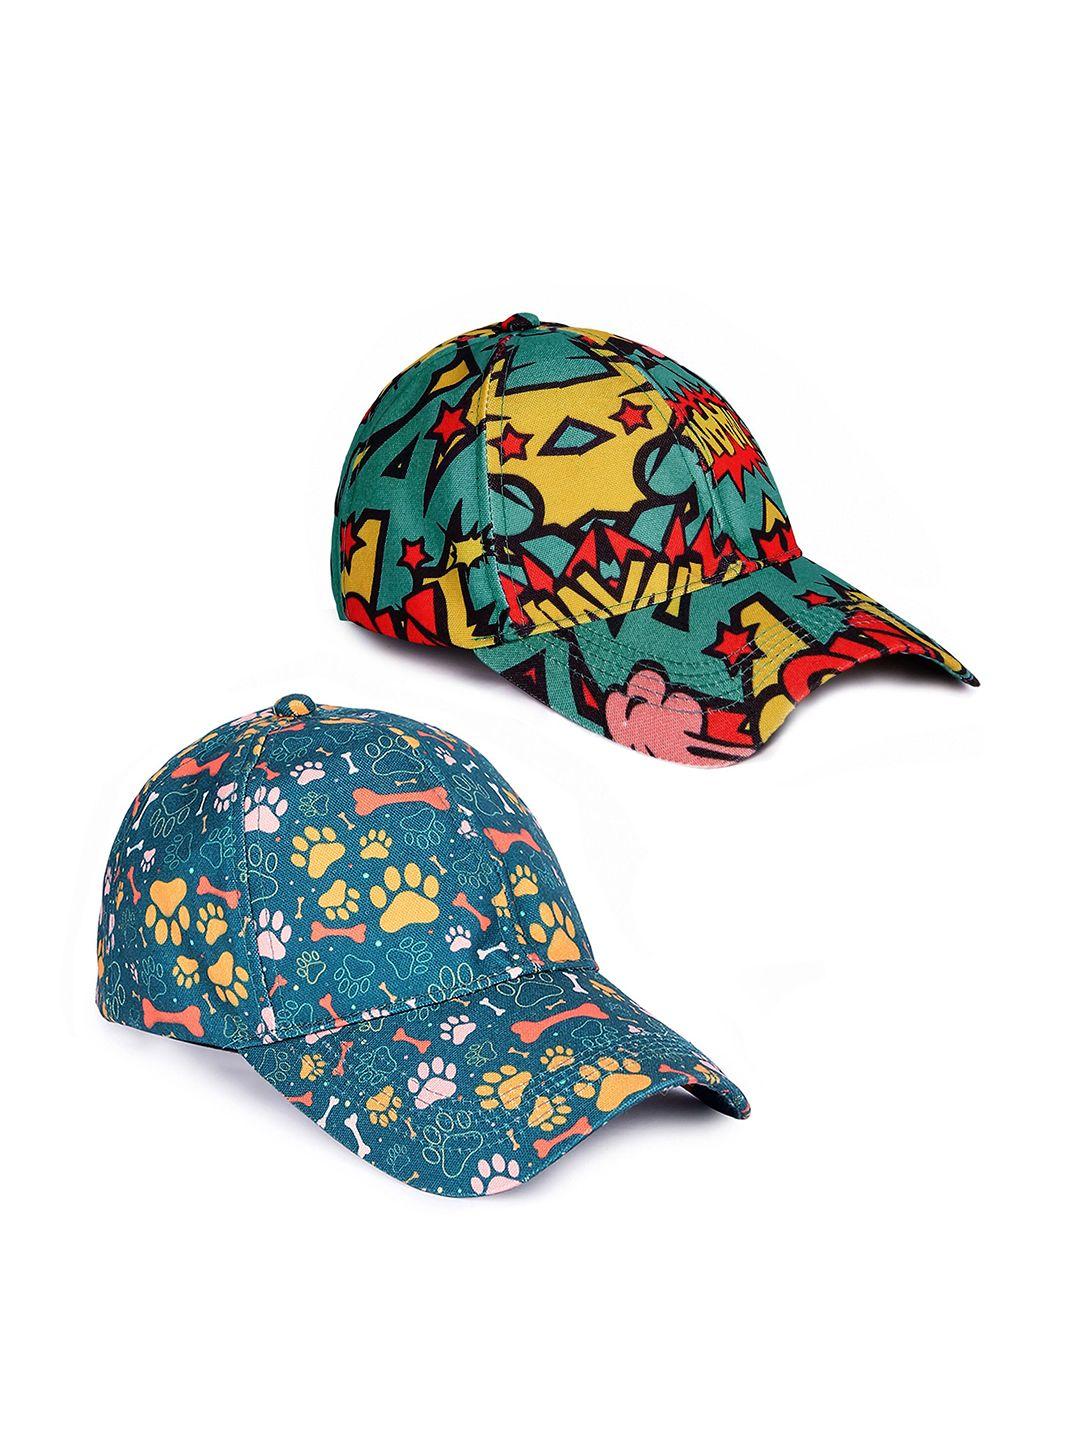 knotyy set of 2 teal & yellow printed canvas snapback cap